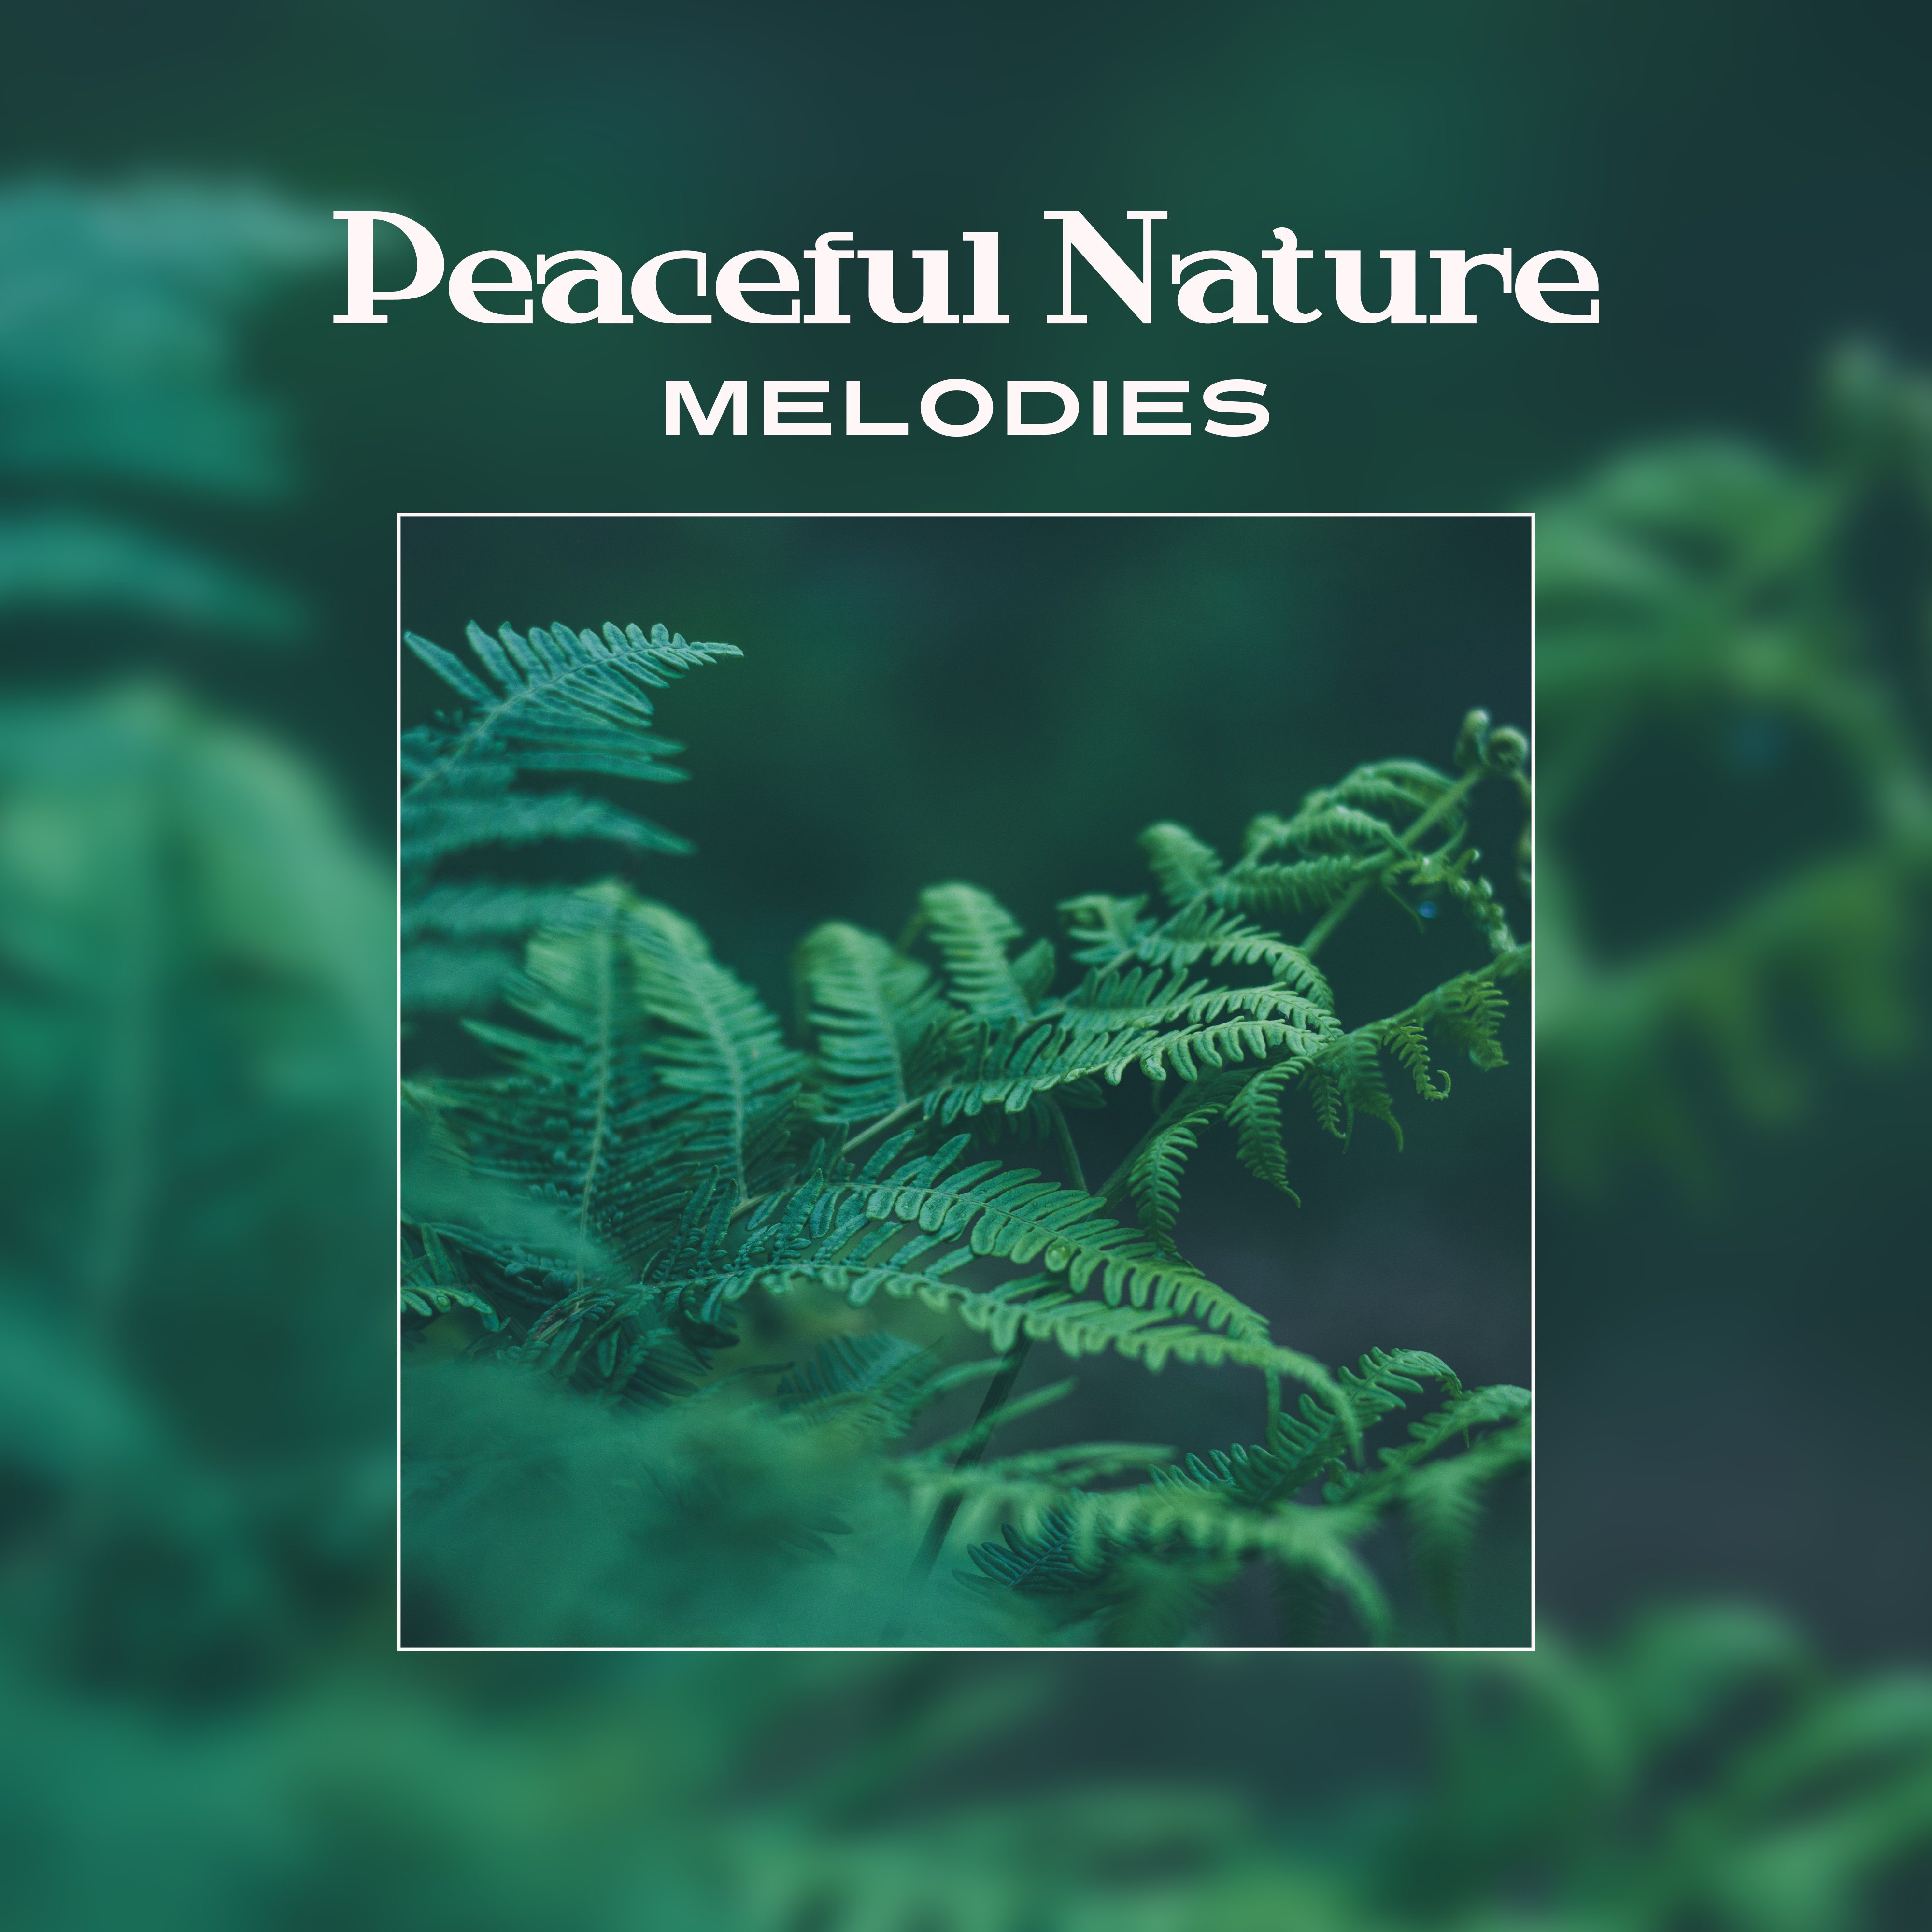 Peaceful Nature Melodies – Soft Sounds to Calm Mind, Body Relaxation Music, Time to Rest, Healing Melodies